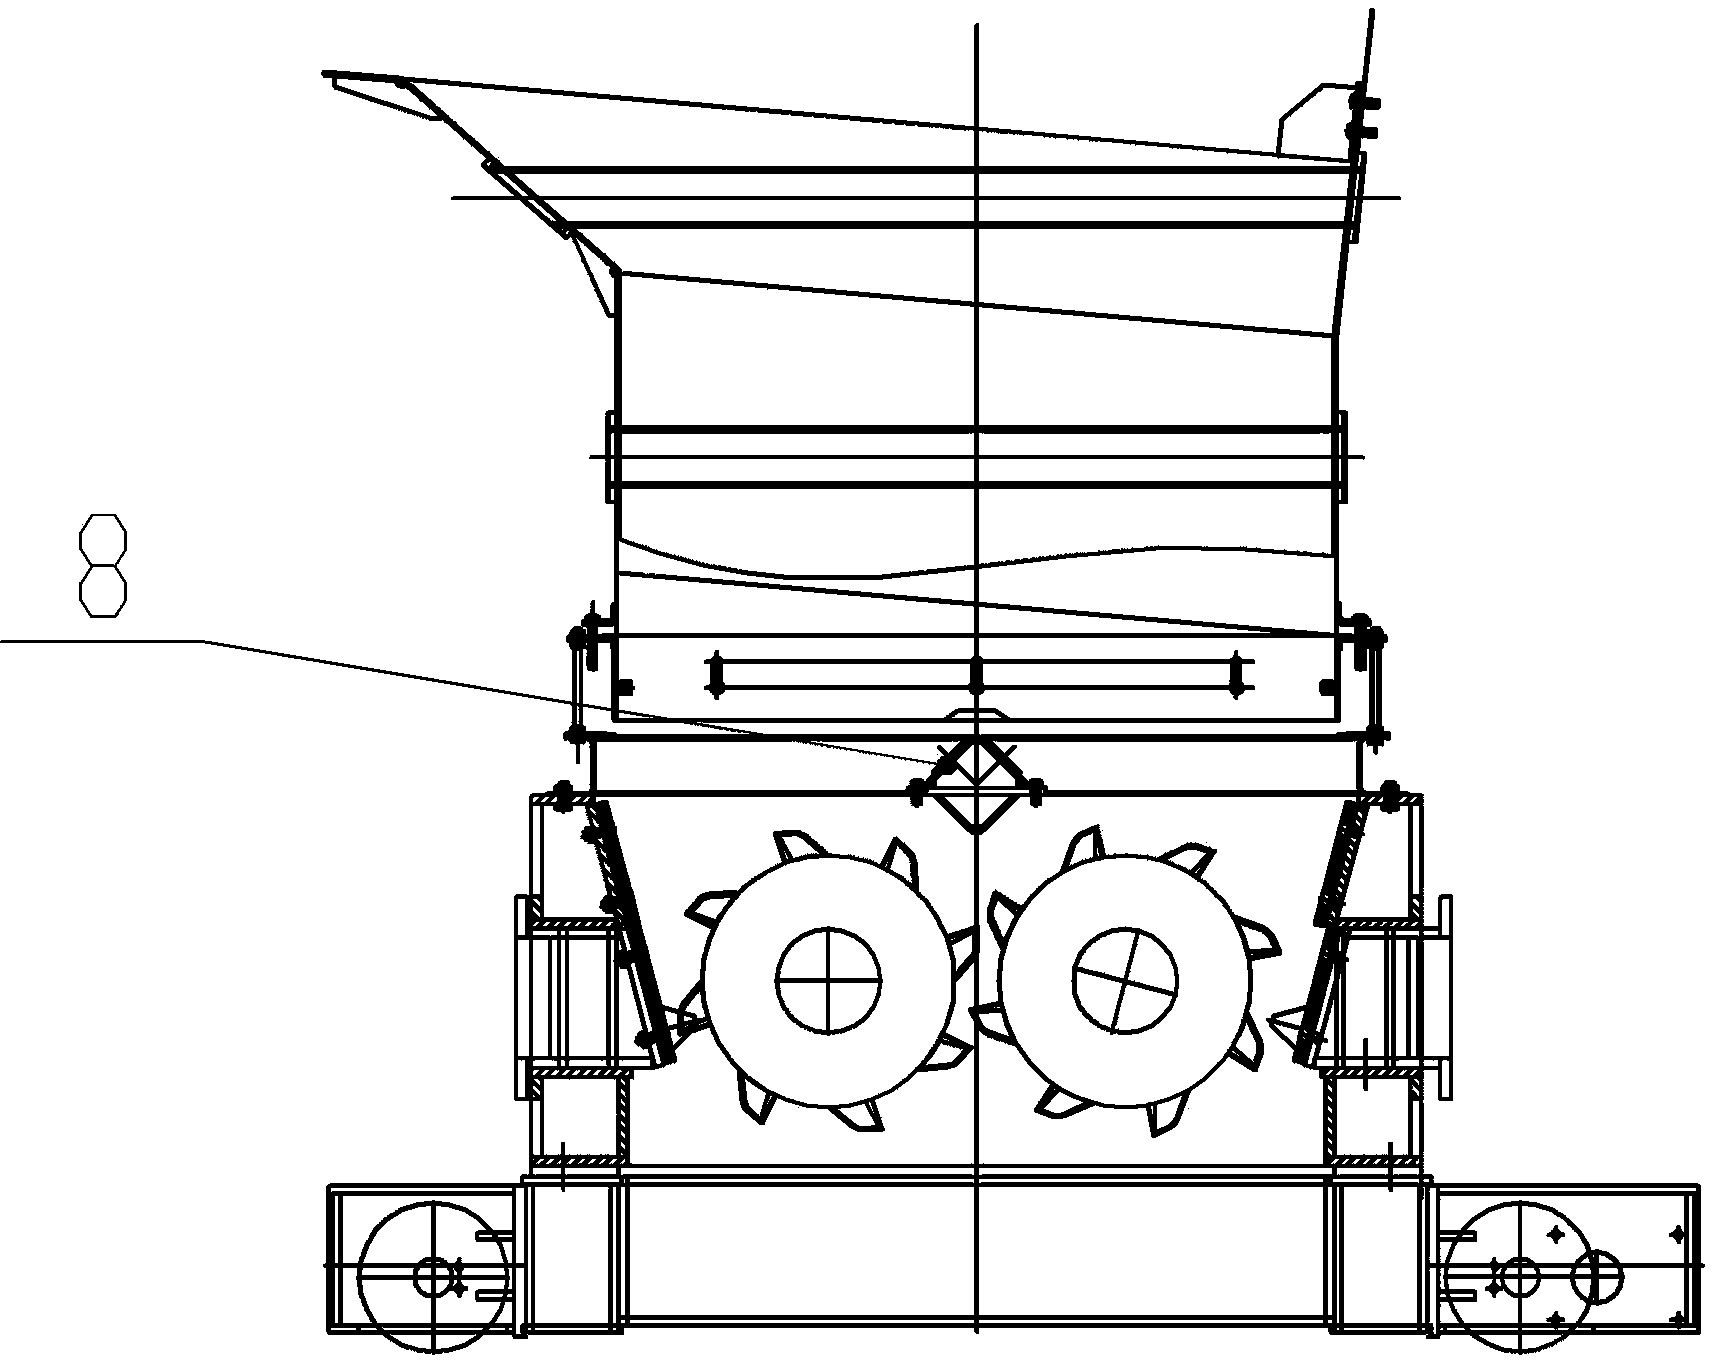 Large efficient screening-type double-toothed roll crusher provided with distribution device